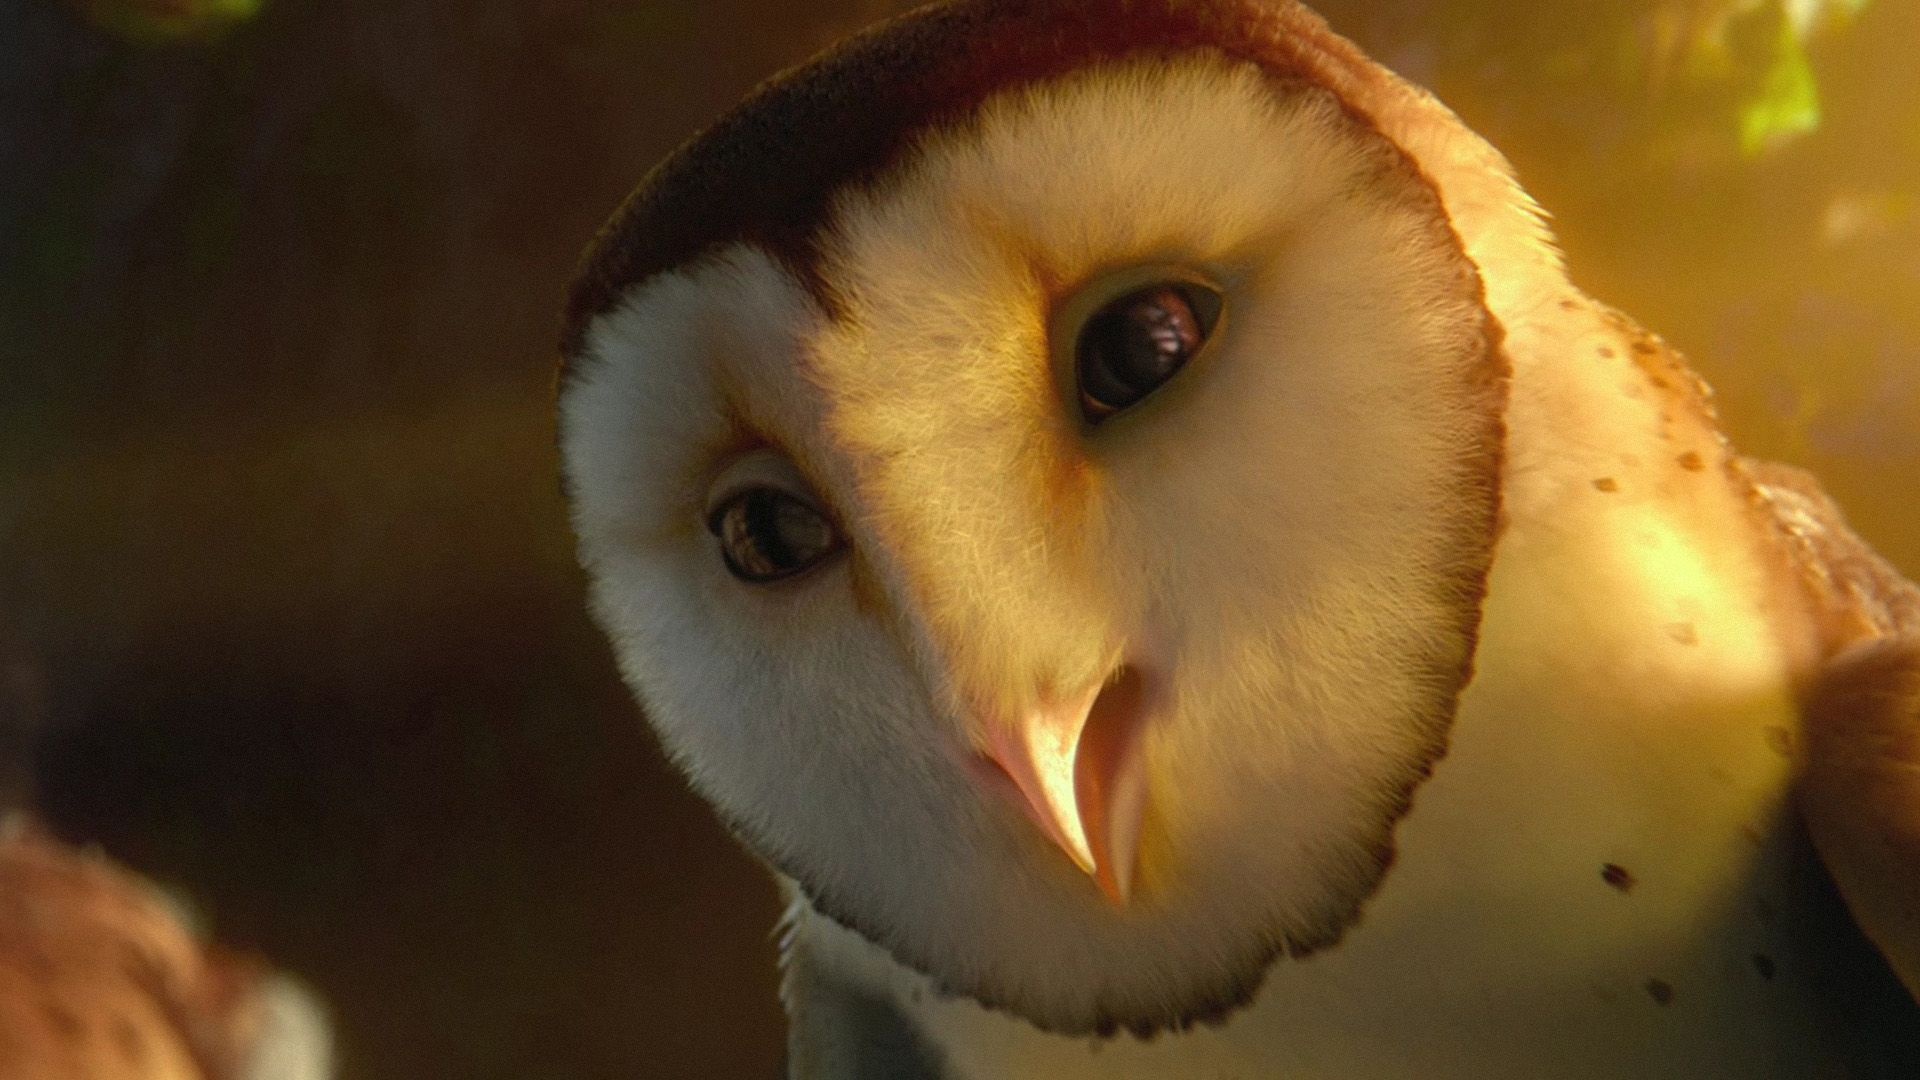 Legend of the Guardians: The Owls of Ga'Hoole, Mesmerizing wallpapers, Captivating movie, Majestic owls, 1920x1080 Full HD Desktop